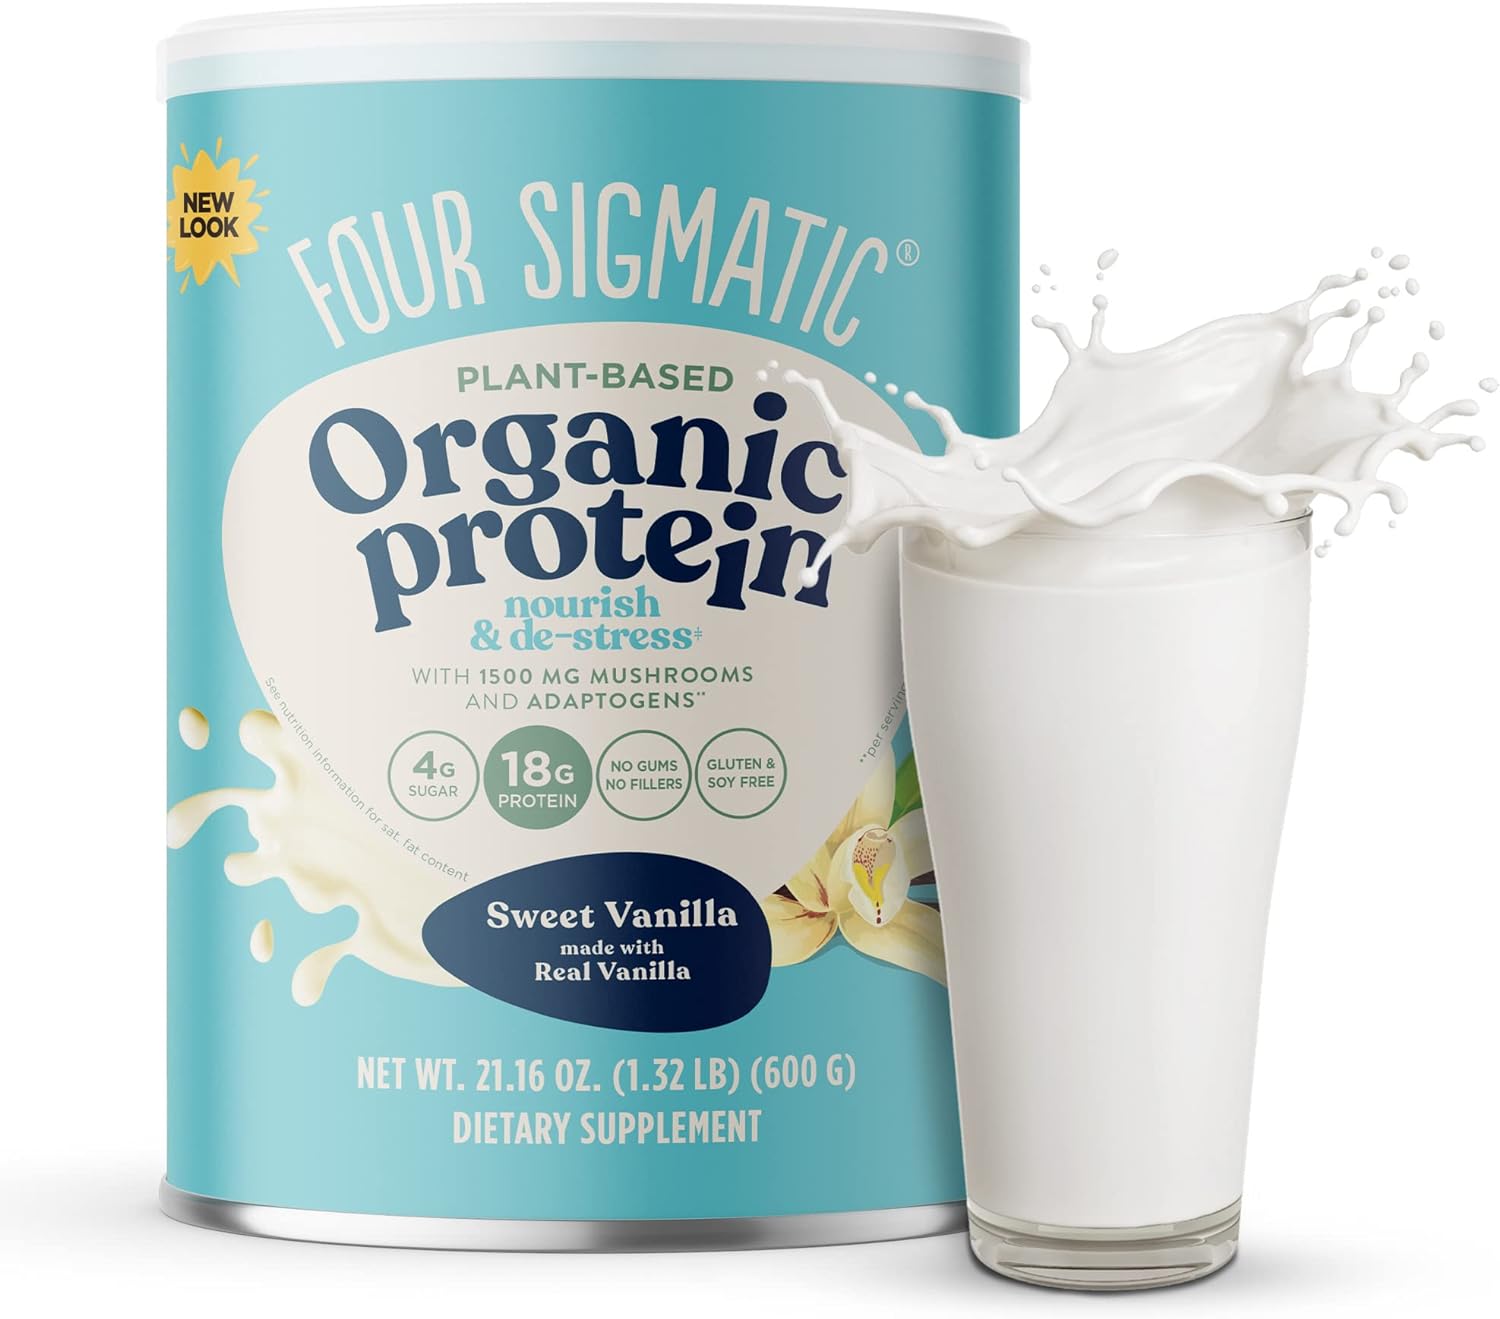 Four Sigmatic Organic Vegan Protein Powder | 18g Plant-Based Protein per Serving | Gluten Free, Dairy Free, Soy Free, Non-GMO with No Filler Ingredients | 21.16oz, 15 Servings | Sweet Vanilla